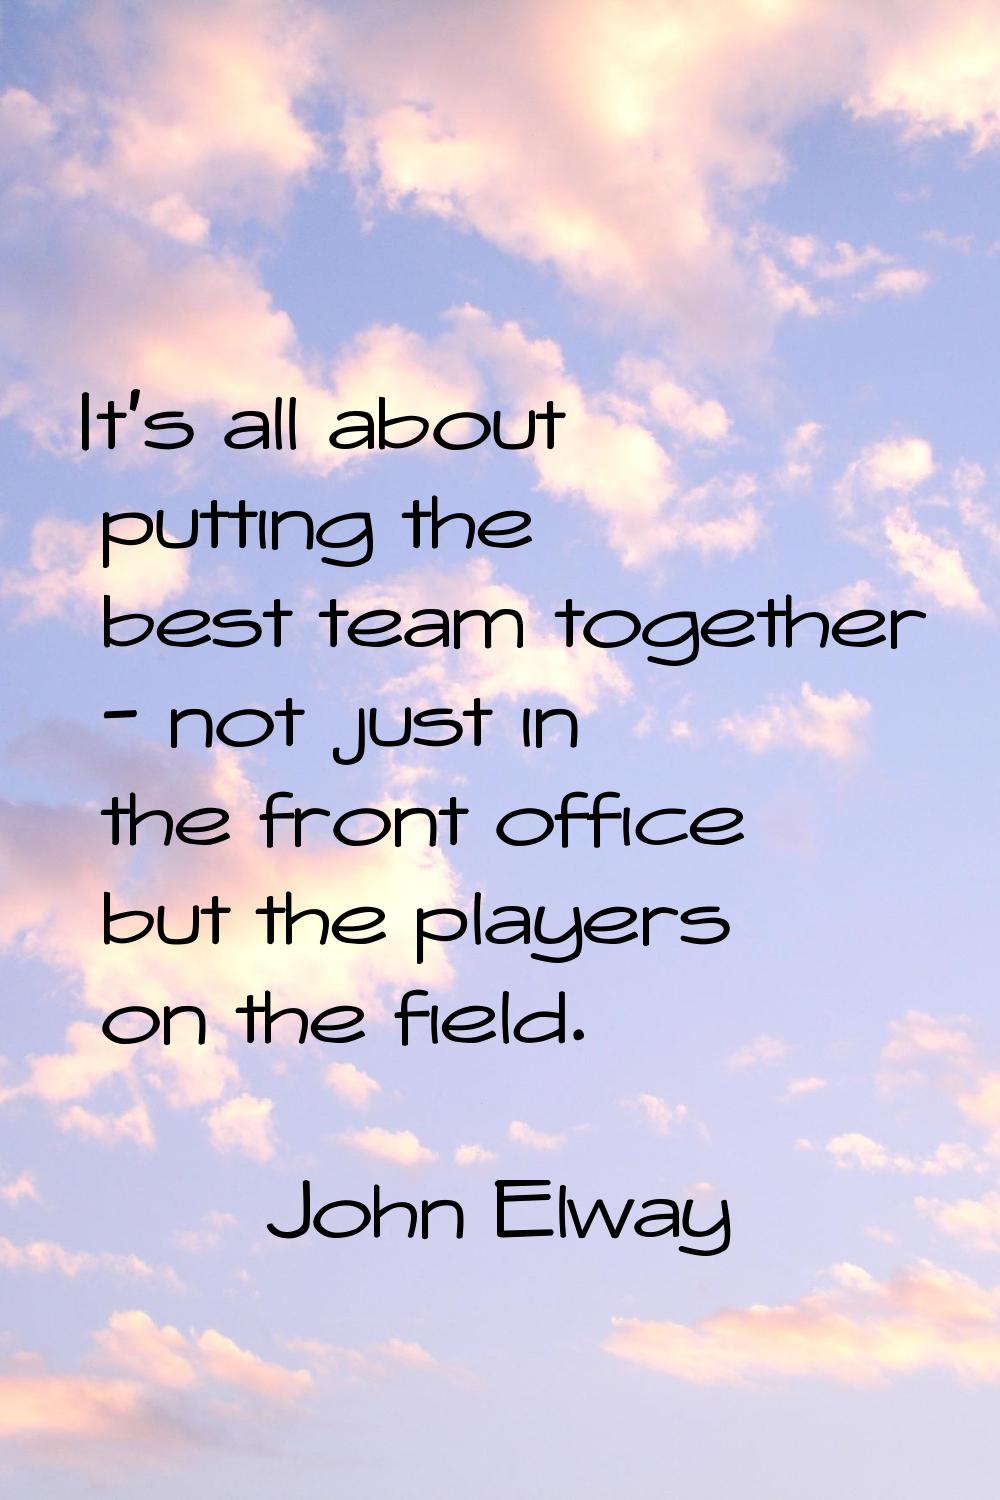 It's all about putting the best team together - not just in the front office but the players on the